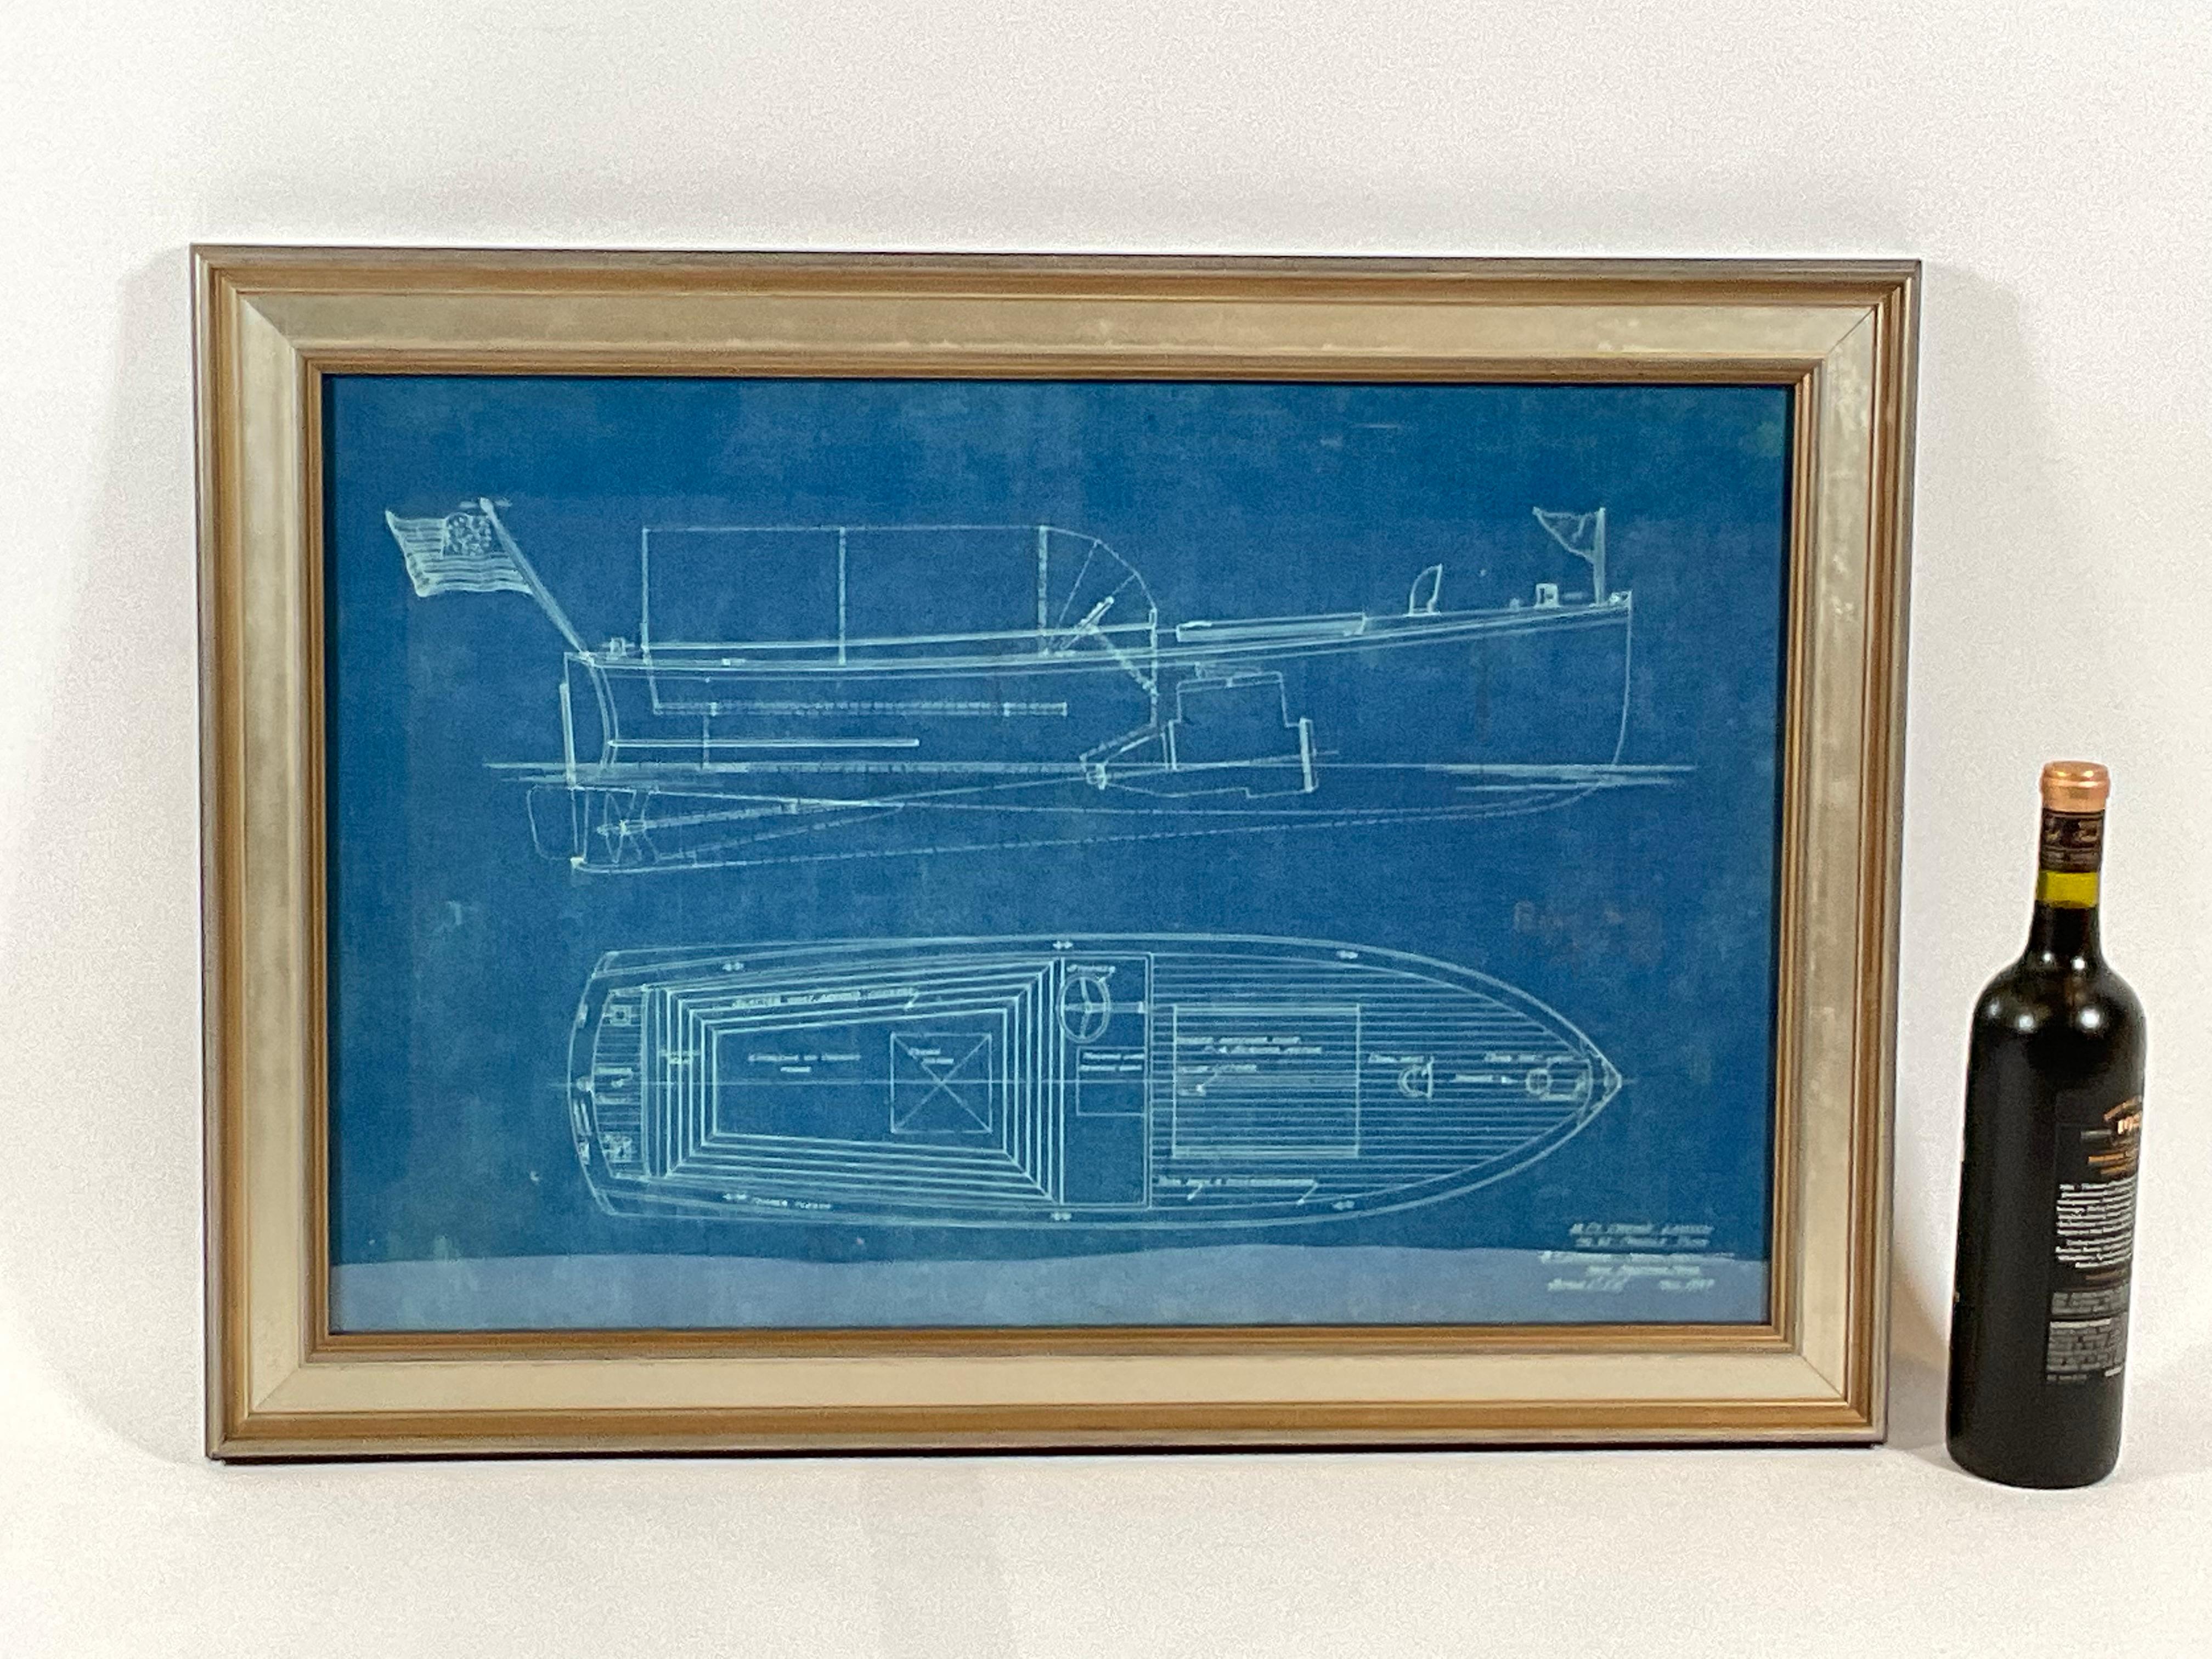 Original boat blueprint from 1927 drawn by naval architect Benjamin T Dobson of New Bedford, Massachusetts. The legend at lower right reads: eighteen-foot crew’s launch, no. 61-profile plan. Scale one-inch equals one foot. Very nice plan showing an